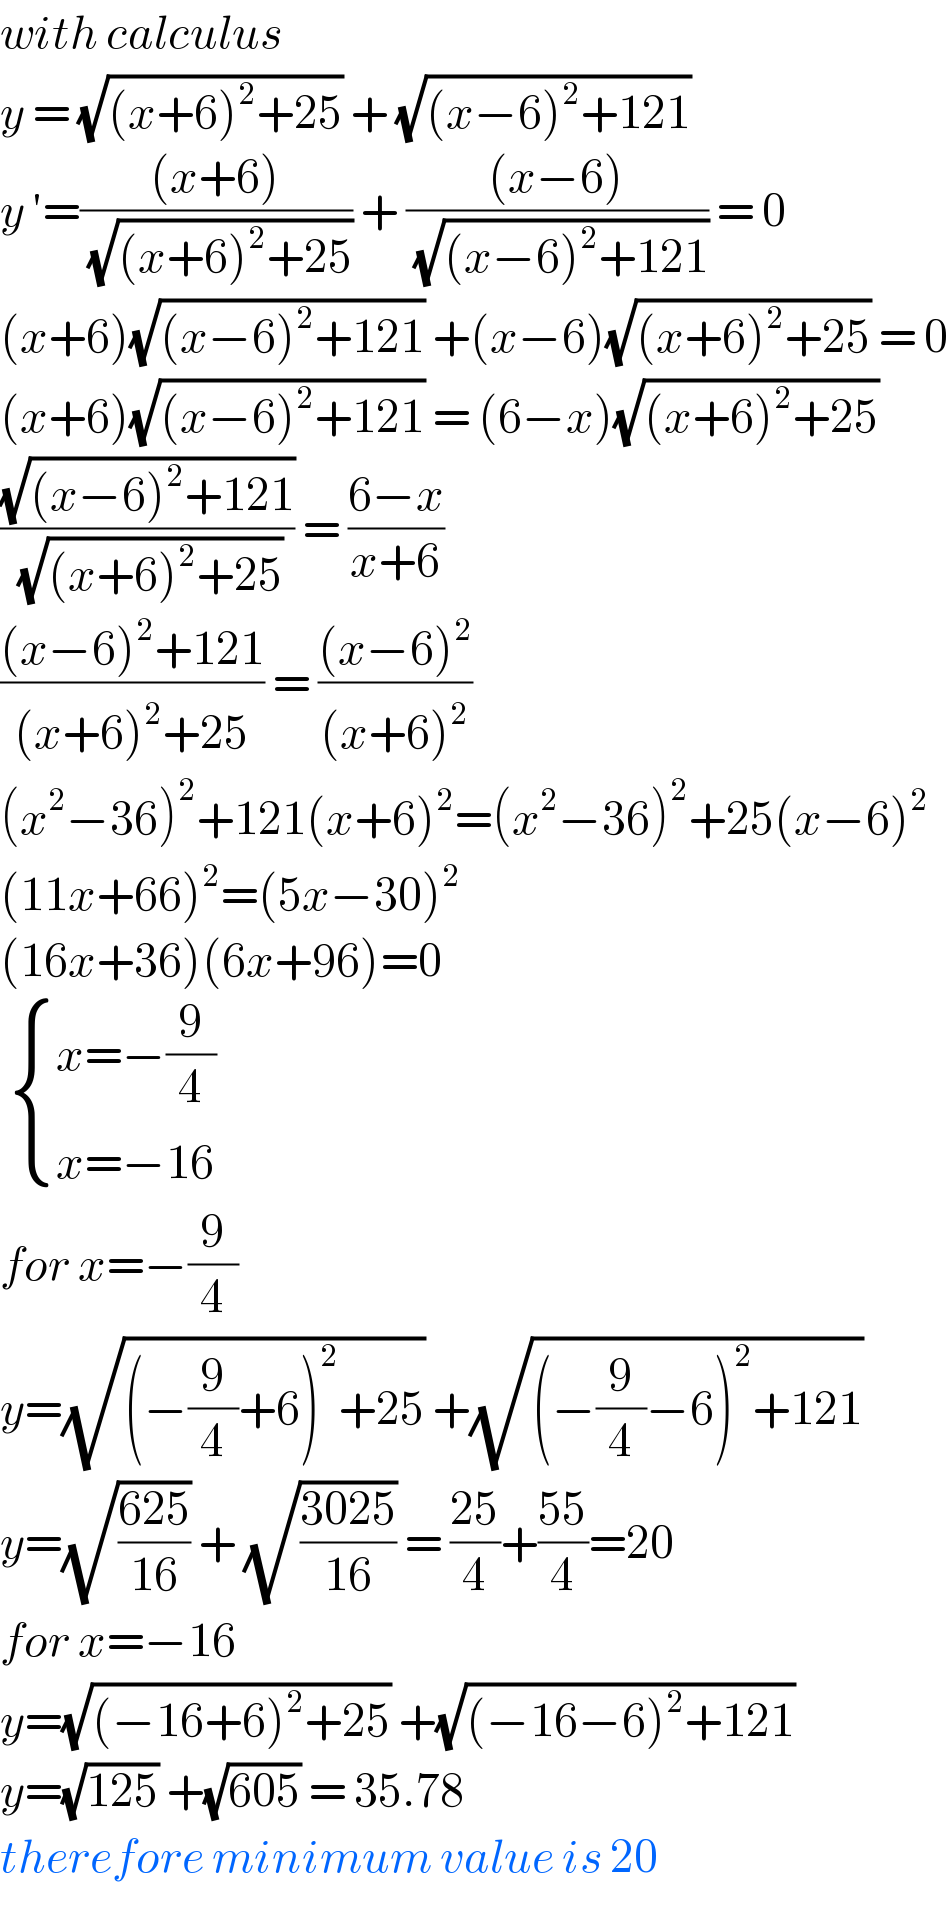 with calculus  y = (√((x+6)^2 +25)) + (√((x−6)^2 +121))  y ′=(((x+6))/( (√((x+6)^2 +25)))) + (((x−6))/( (√((x−6)^2 +121)))) = 0  (x+6)(√((x−6)^2 +121)) +(x−6)(√((x+6)^2 +25)) = 0  (x+6)(√((x−6)^2 +121)) = (6−x)(√((x+6)^2 +25))  ((√((x−6)^2 +121))/( (√((x+6)^2 +25)))) = ((6−x)/(x+6))  (((x−6)^2 +121)/((x+6)^2 +25)) = (((x−6)^2 )/((x+6)^2 ))  (x^2 −36)^2 +121(x+6)^2 =(x^2 −36)^2 +25(x−6)^2   (11x+66)^2 =(5x−30)^2   (16x+36)(6x+96)=0    { ((x=−(9/4))),((x=−16)) :}  for x=−(9/4)  y=(√((−(9/4)+6)^2 +25)) +(√((−(9/4)−6)^2 +121))  y=(√((625)/(16))) + (√((3025)/(16))) = ((25)/4)+((55)/4)=20  for x=−16  y=(√((−16+6)^2 +25)) +(√((−16−6)^2 +121))  y=(√(125)) +(√(605)) = 35.78  therefore minimum value is 20  